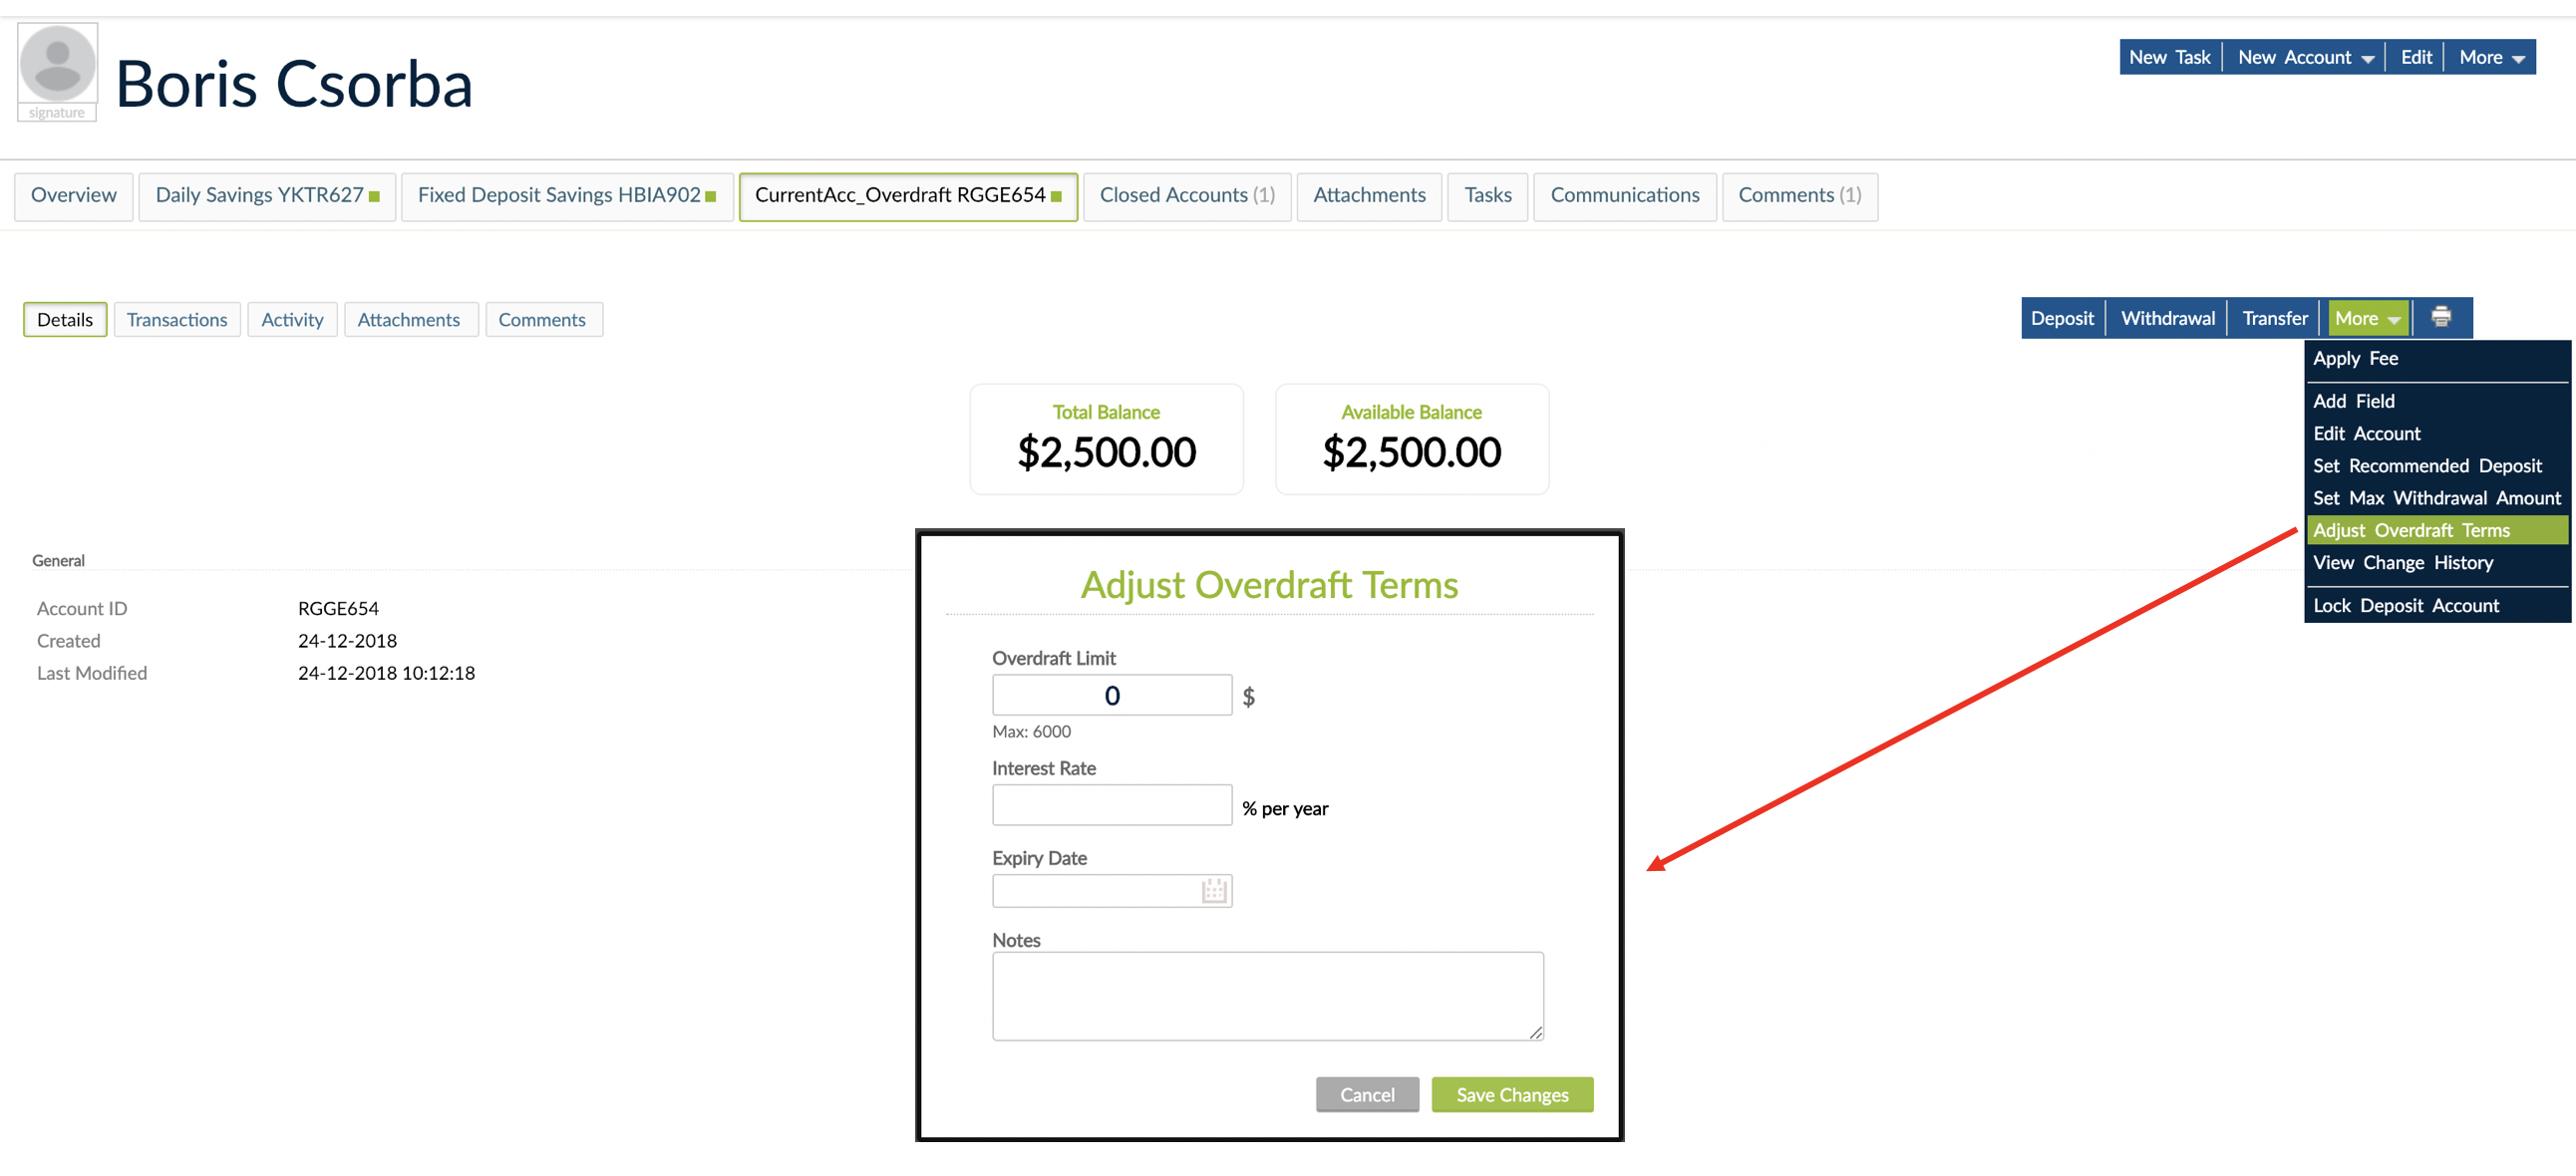 "Adjust Overdraft Terms" screen with Overdraft Limit, Interest Rate (% per year),  Expiry Date, and Notes fields with two buttons below: Cancel and Save Changes